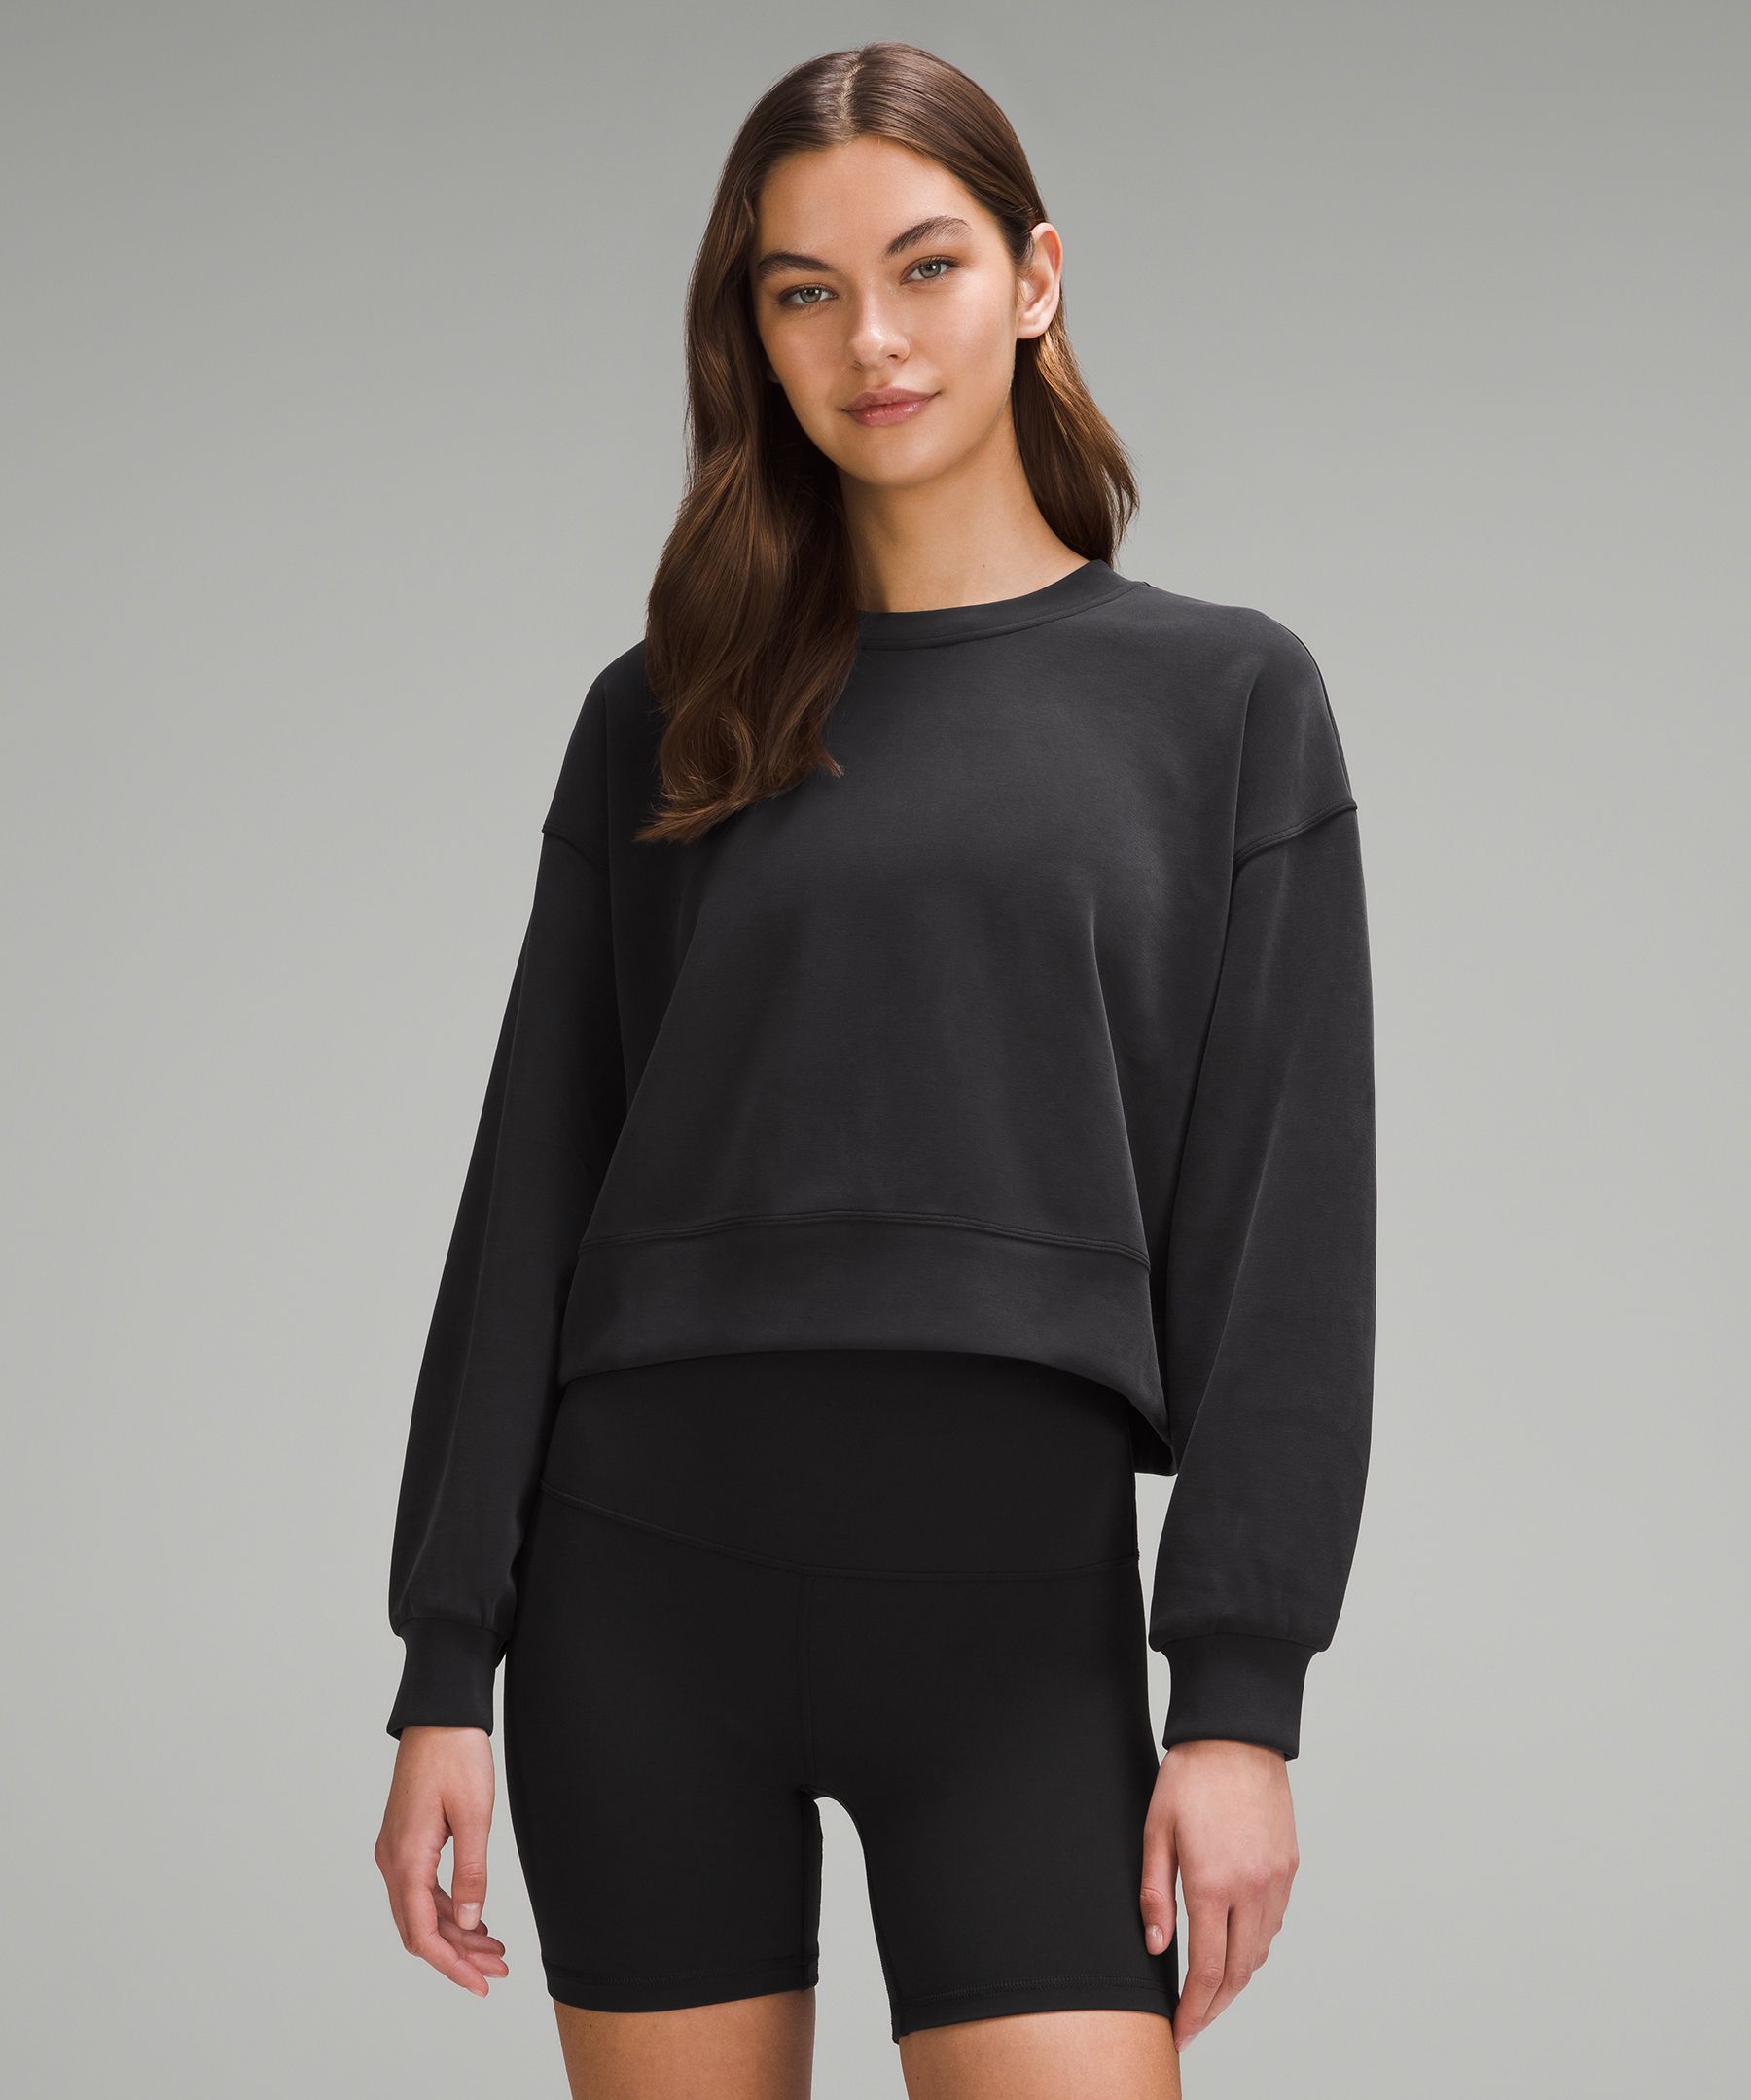 Softstreme Perfectly Oversized Cropped Crew